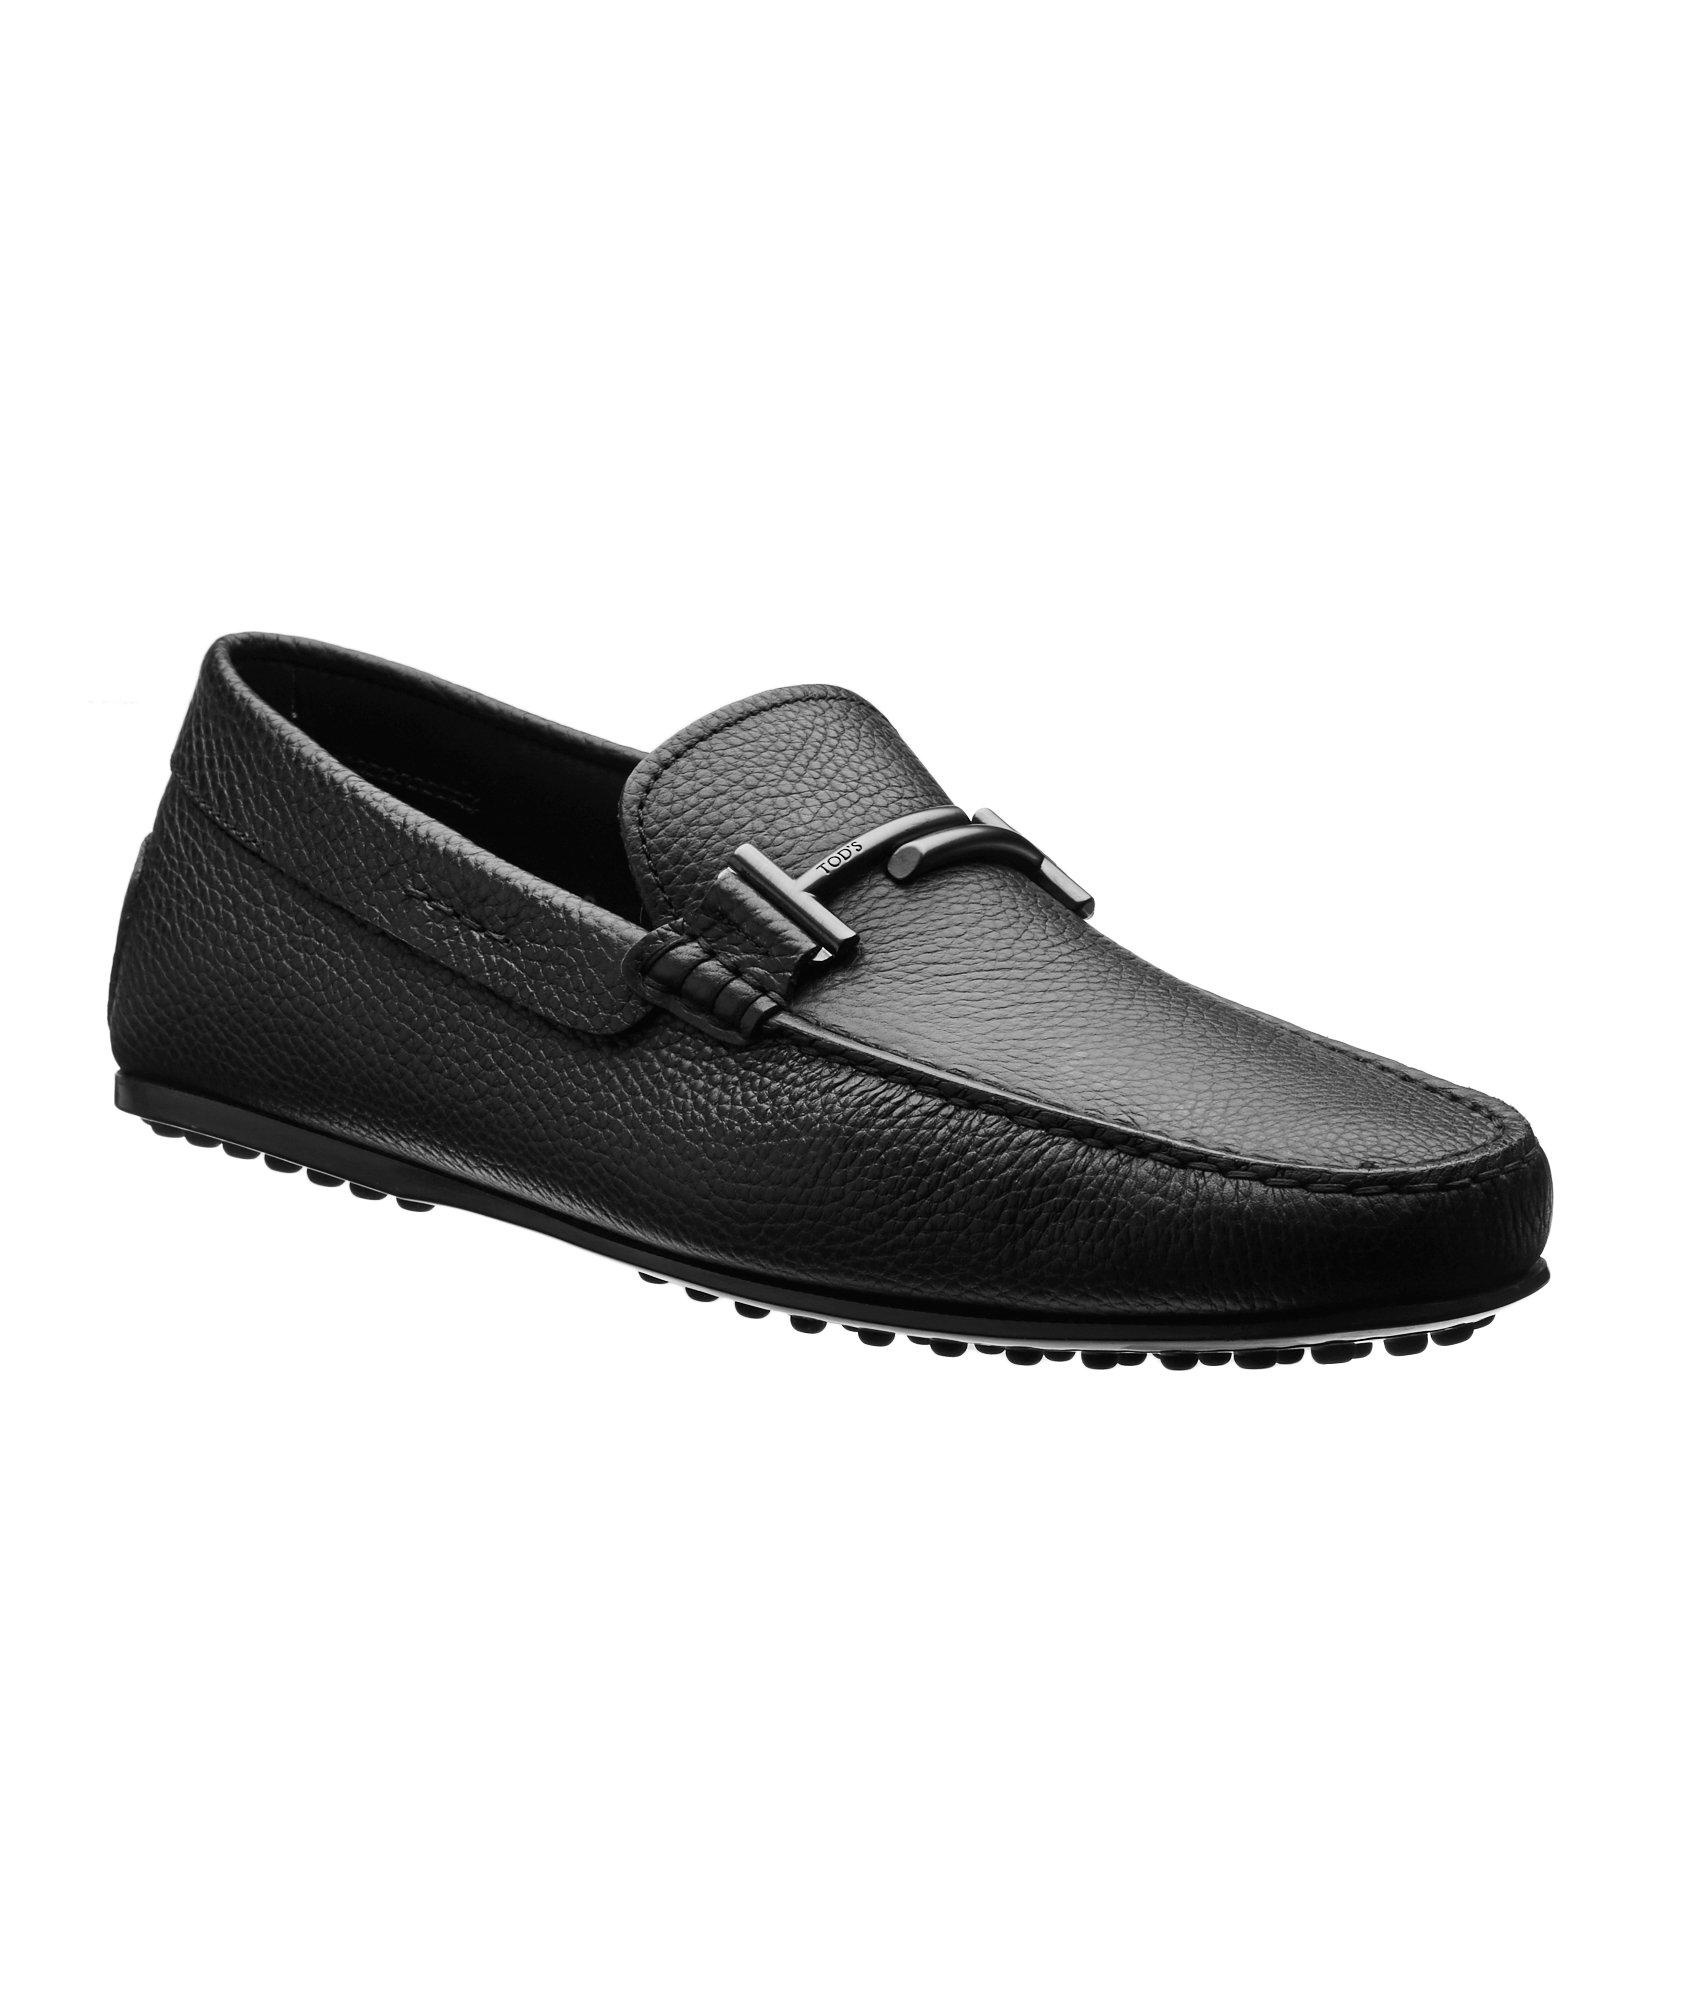 Gommino Elk Leather Loafers image 0